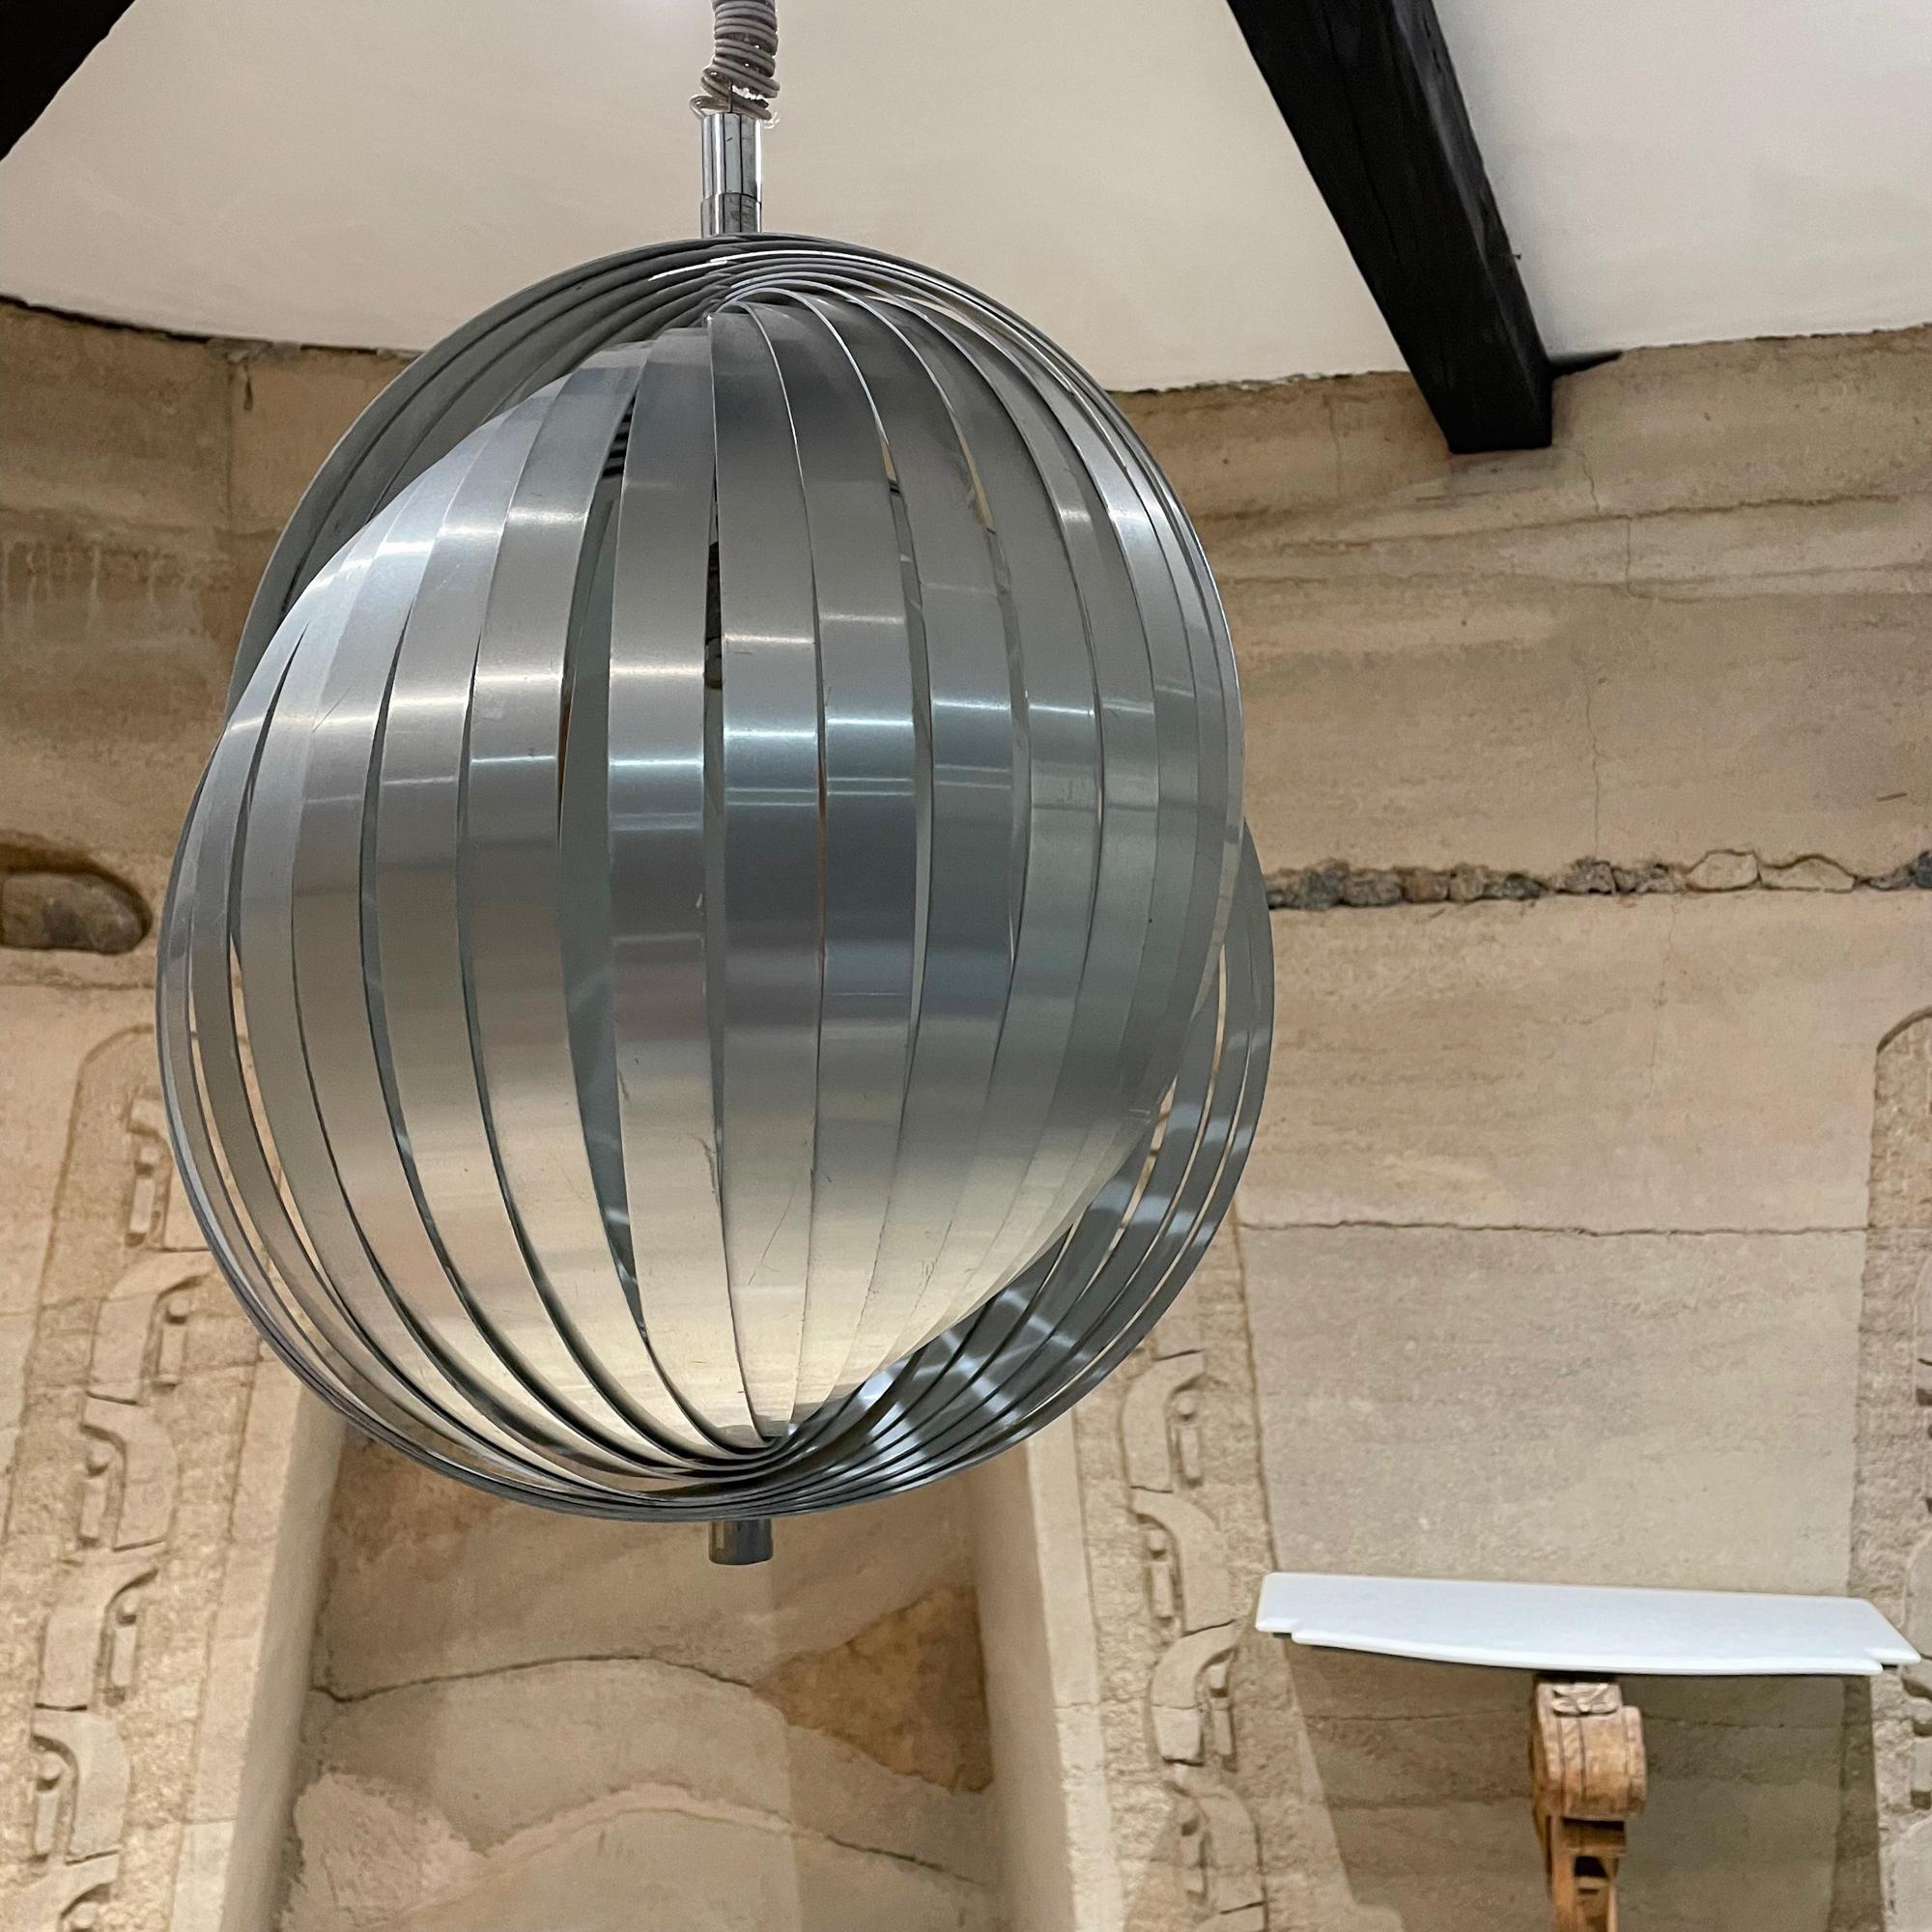 From France sculptural vintage by Henri Mathieu Aluminum
spiral shaped moon hanging Lamp Pendant Light Silver
Space Age 1970s
20 h x 14 diameter inches
Original unrestored vintage condition. Preowned presentation.
Please refer to our